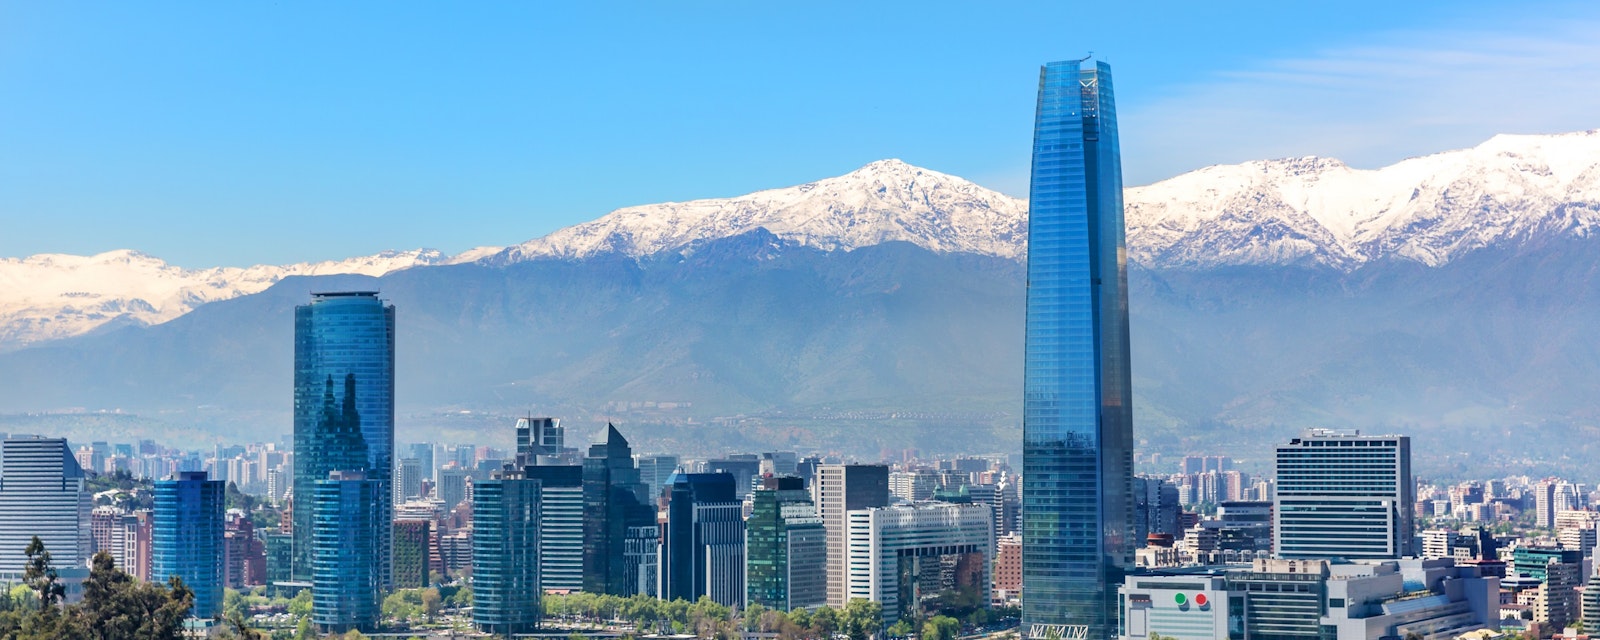 Plenty,Of,Business,Buildings,In,Santiago,Del,Chile,With,Trees